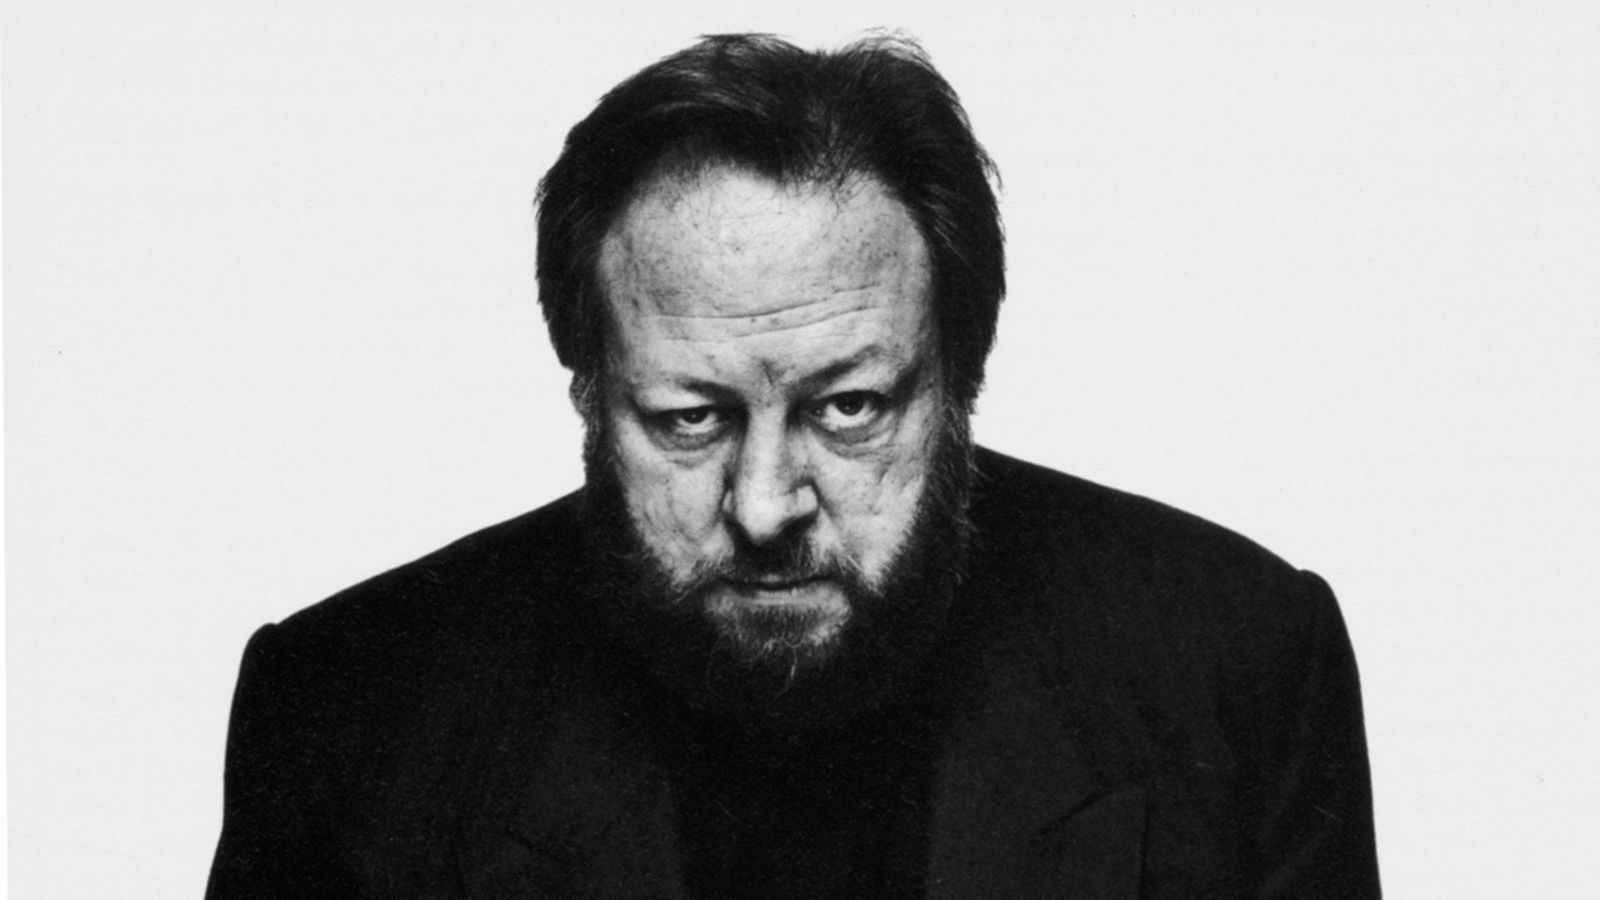 Illustration for article titled Ricky Jay